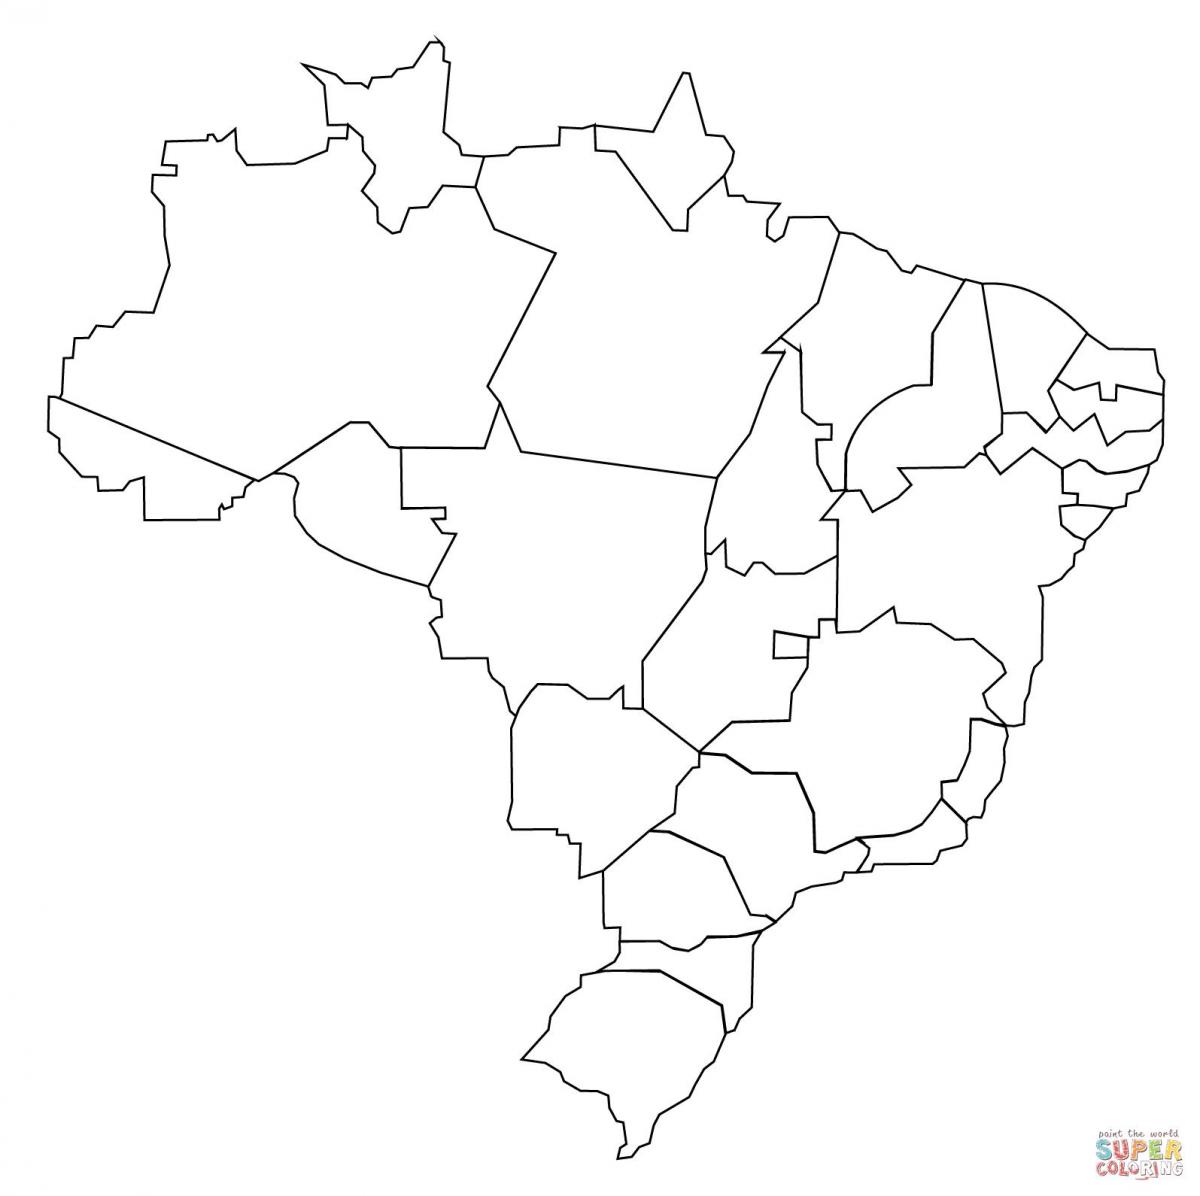 black and white map of Brazil